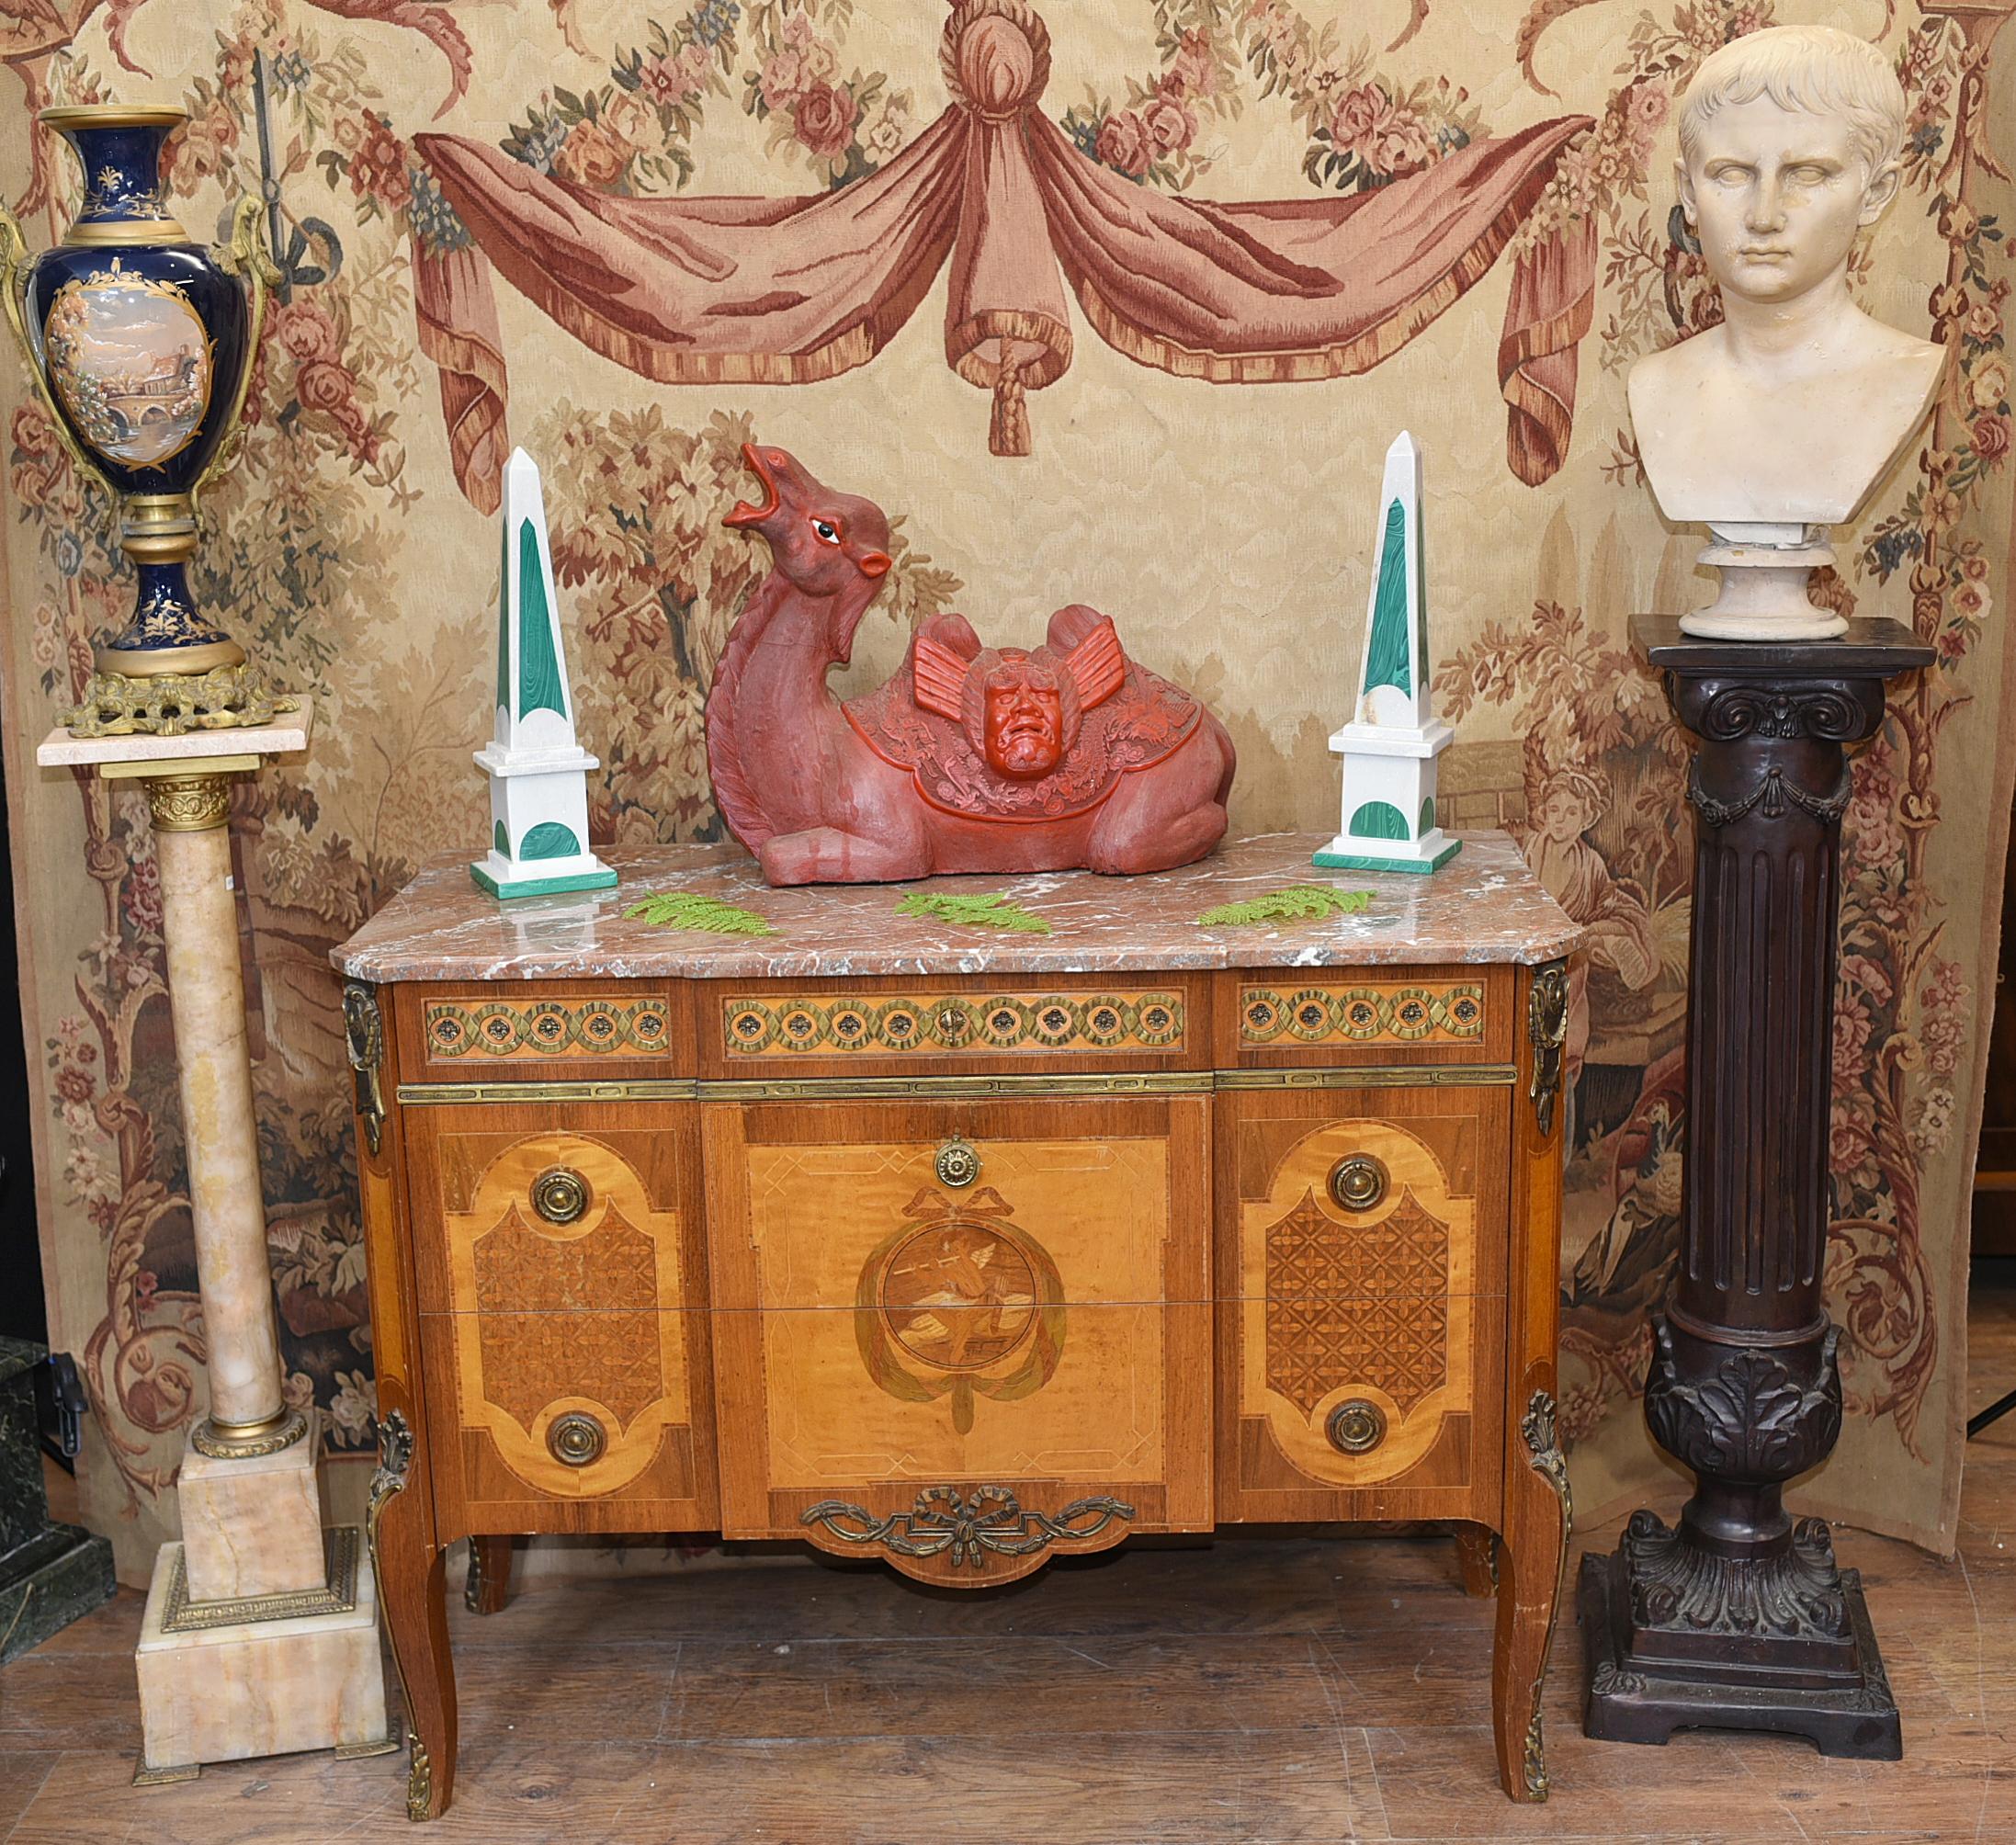 Wonderful Swedish commode we date to circa 1920
Such a good look to this cool piece, very interiors friendly
Ormolu fixtures also original and bright 
Inlay work very intricate showing cherubs and other motifs
Pink marble top is smooth and chip